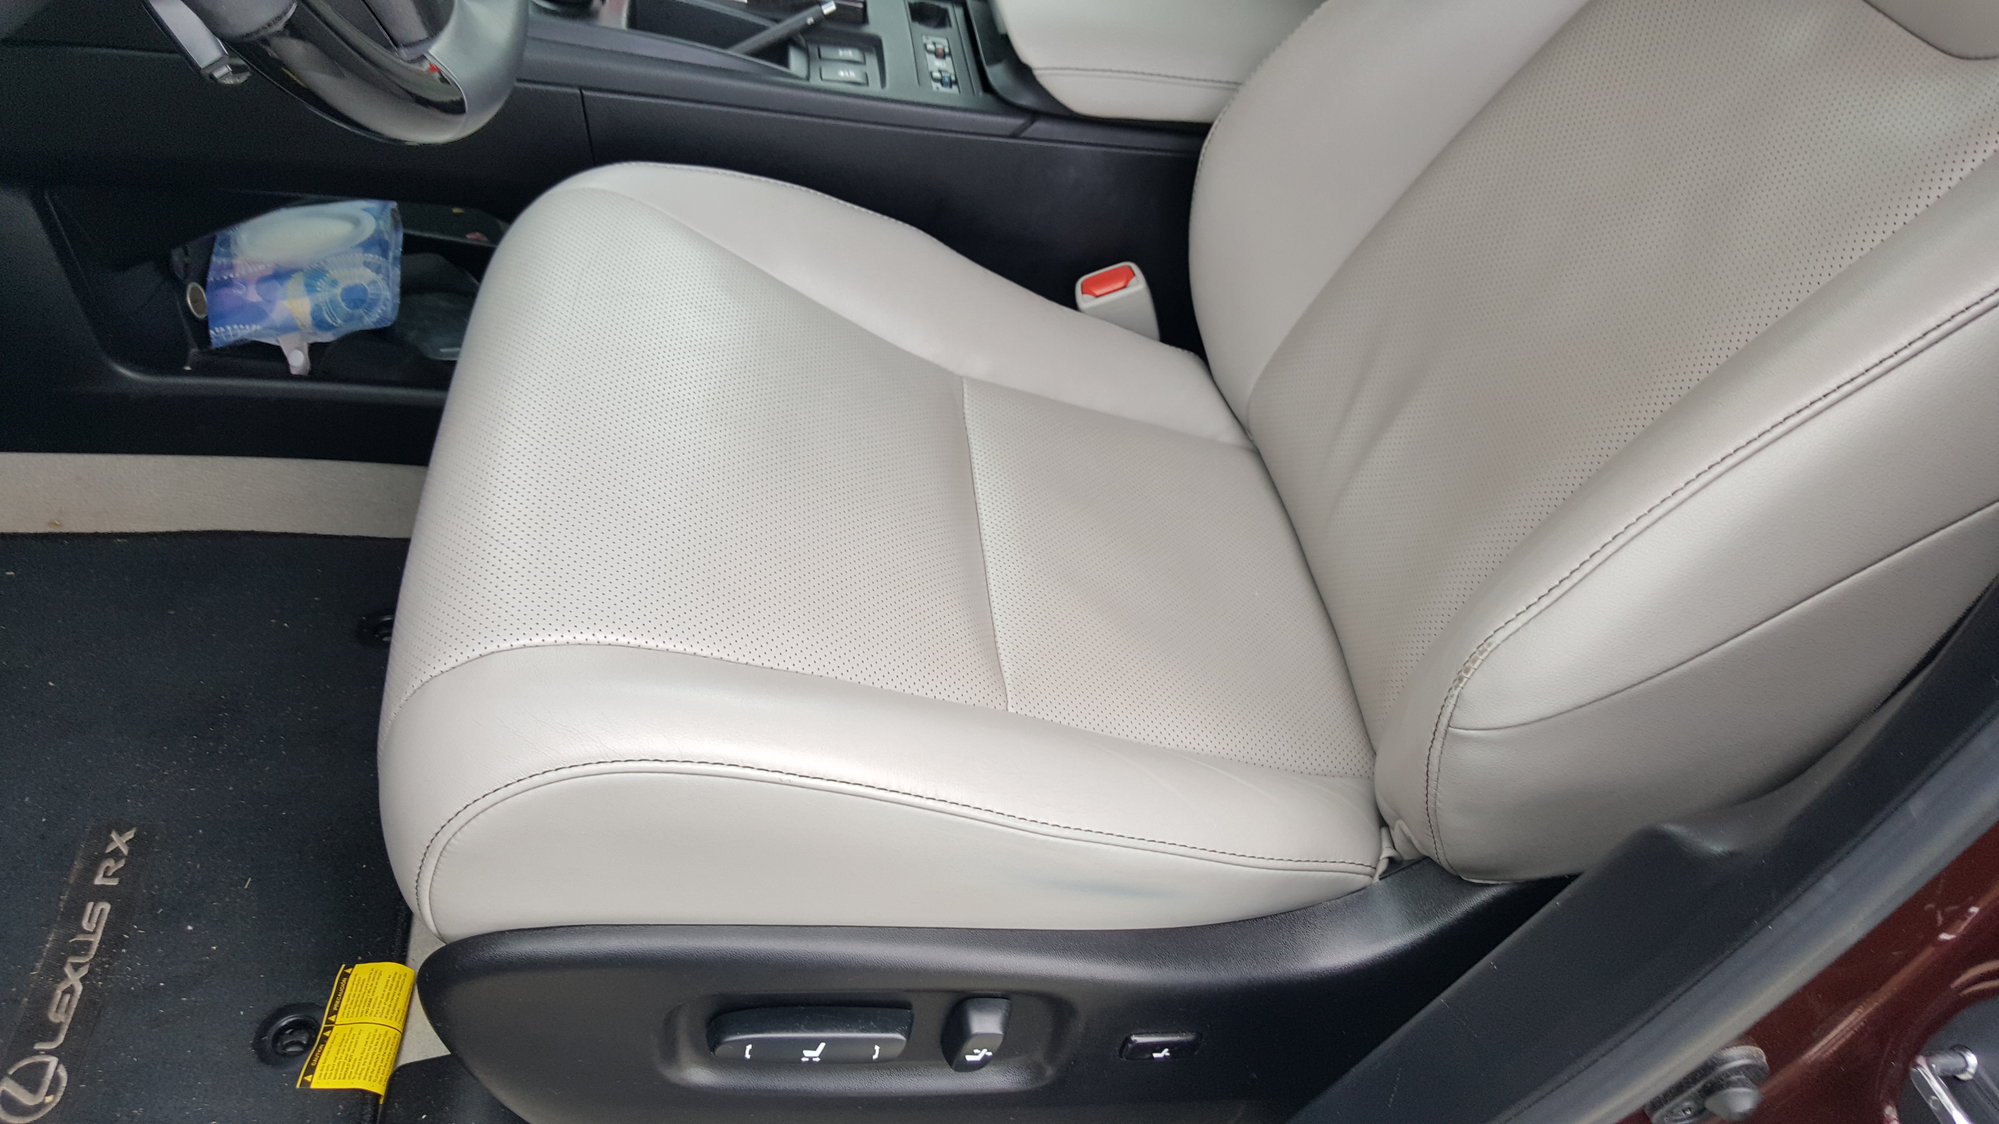 Best Leather Cleaner Conditioner For Lexus Interior Clublexus Forum Discussion - What To Use Clean Lexus Leather Seats